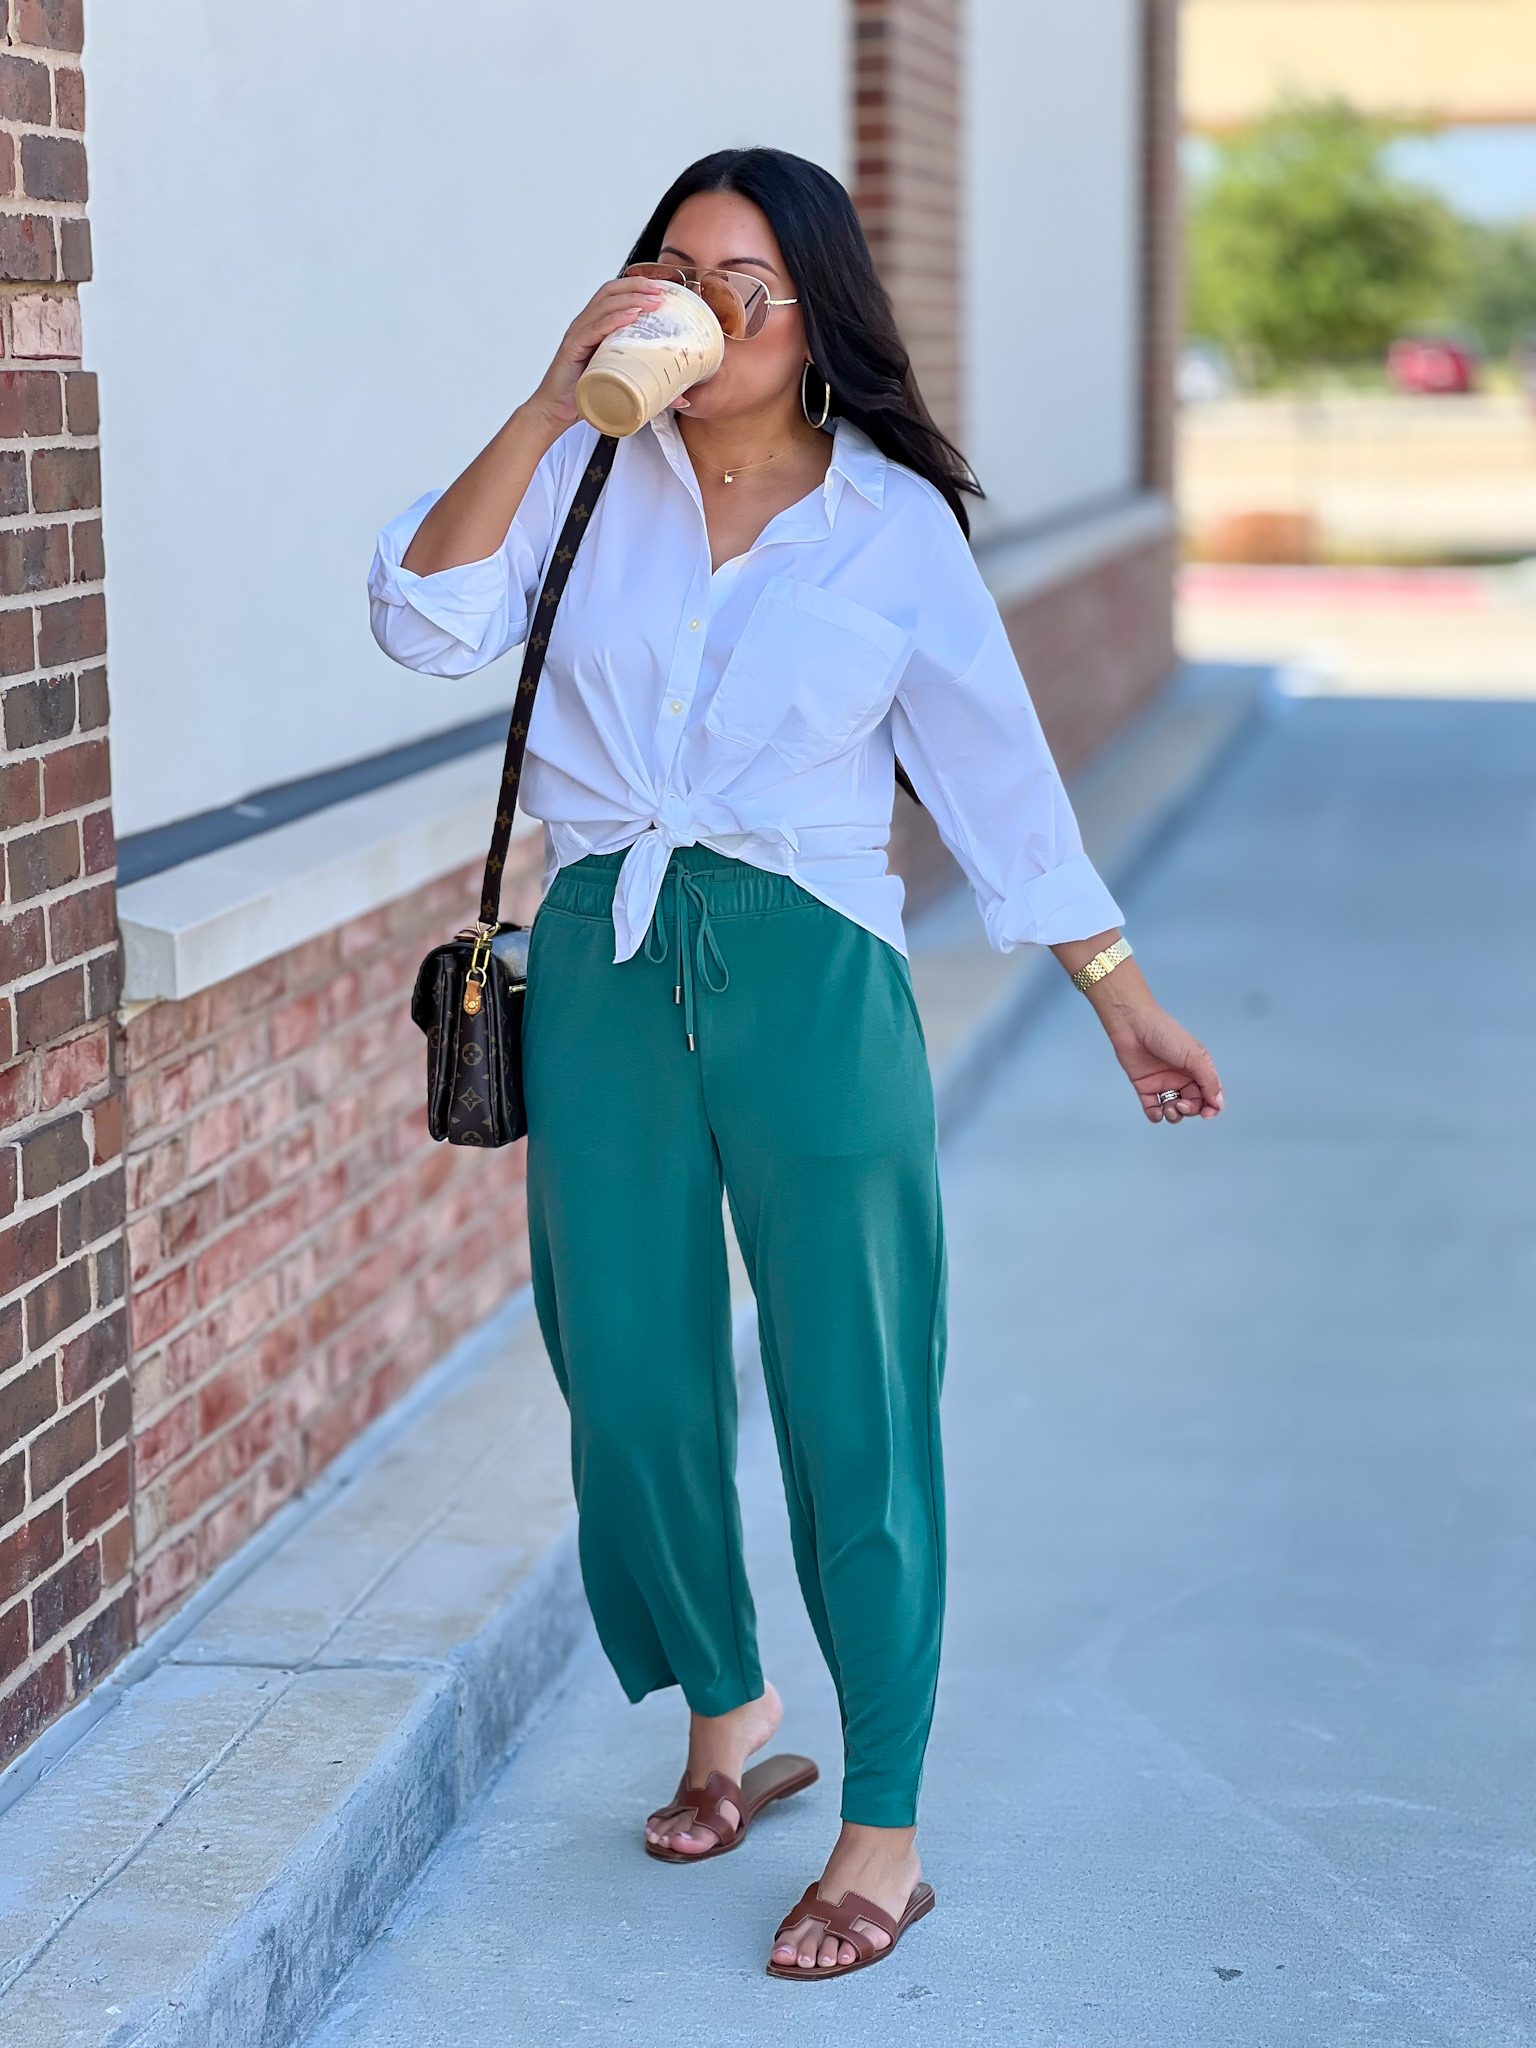 These drawstring pants have been some of my absolute favorites! You can make them super casual or style them!